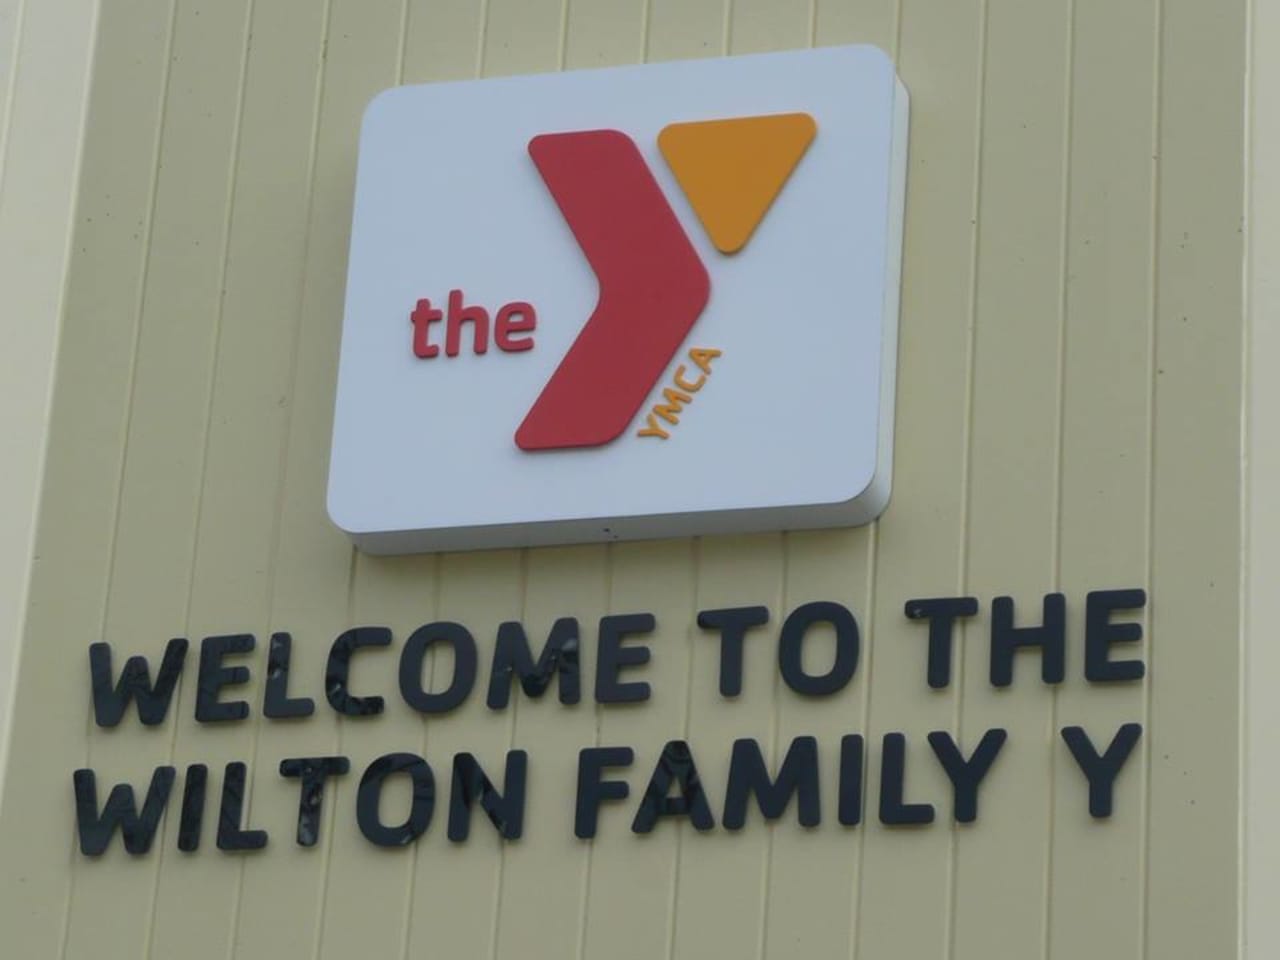 The Wilton Family Y will host a workshop series for women looking to reenter the workforce starting on Oct. 29. 